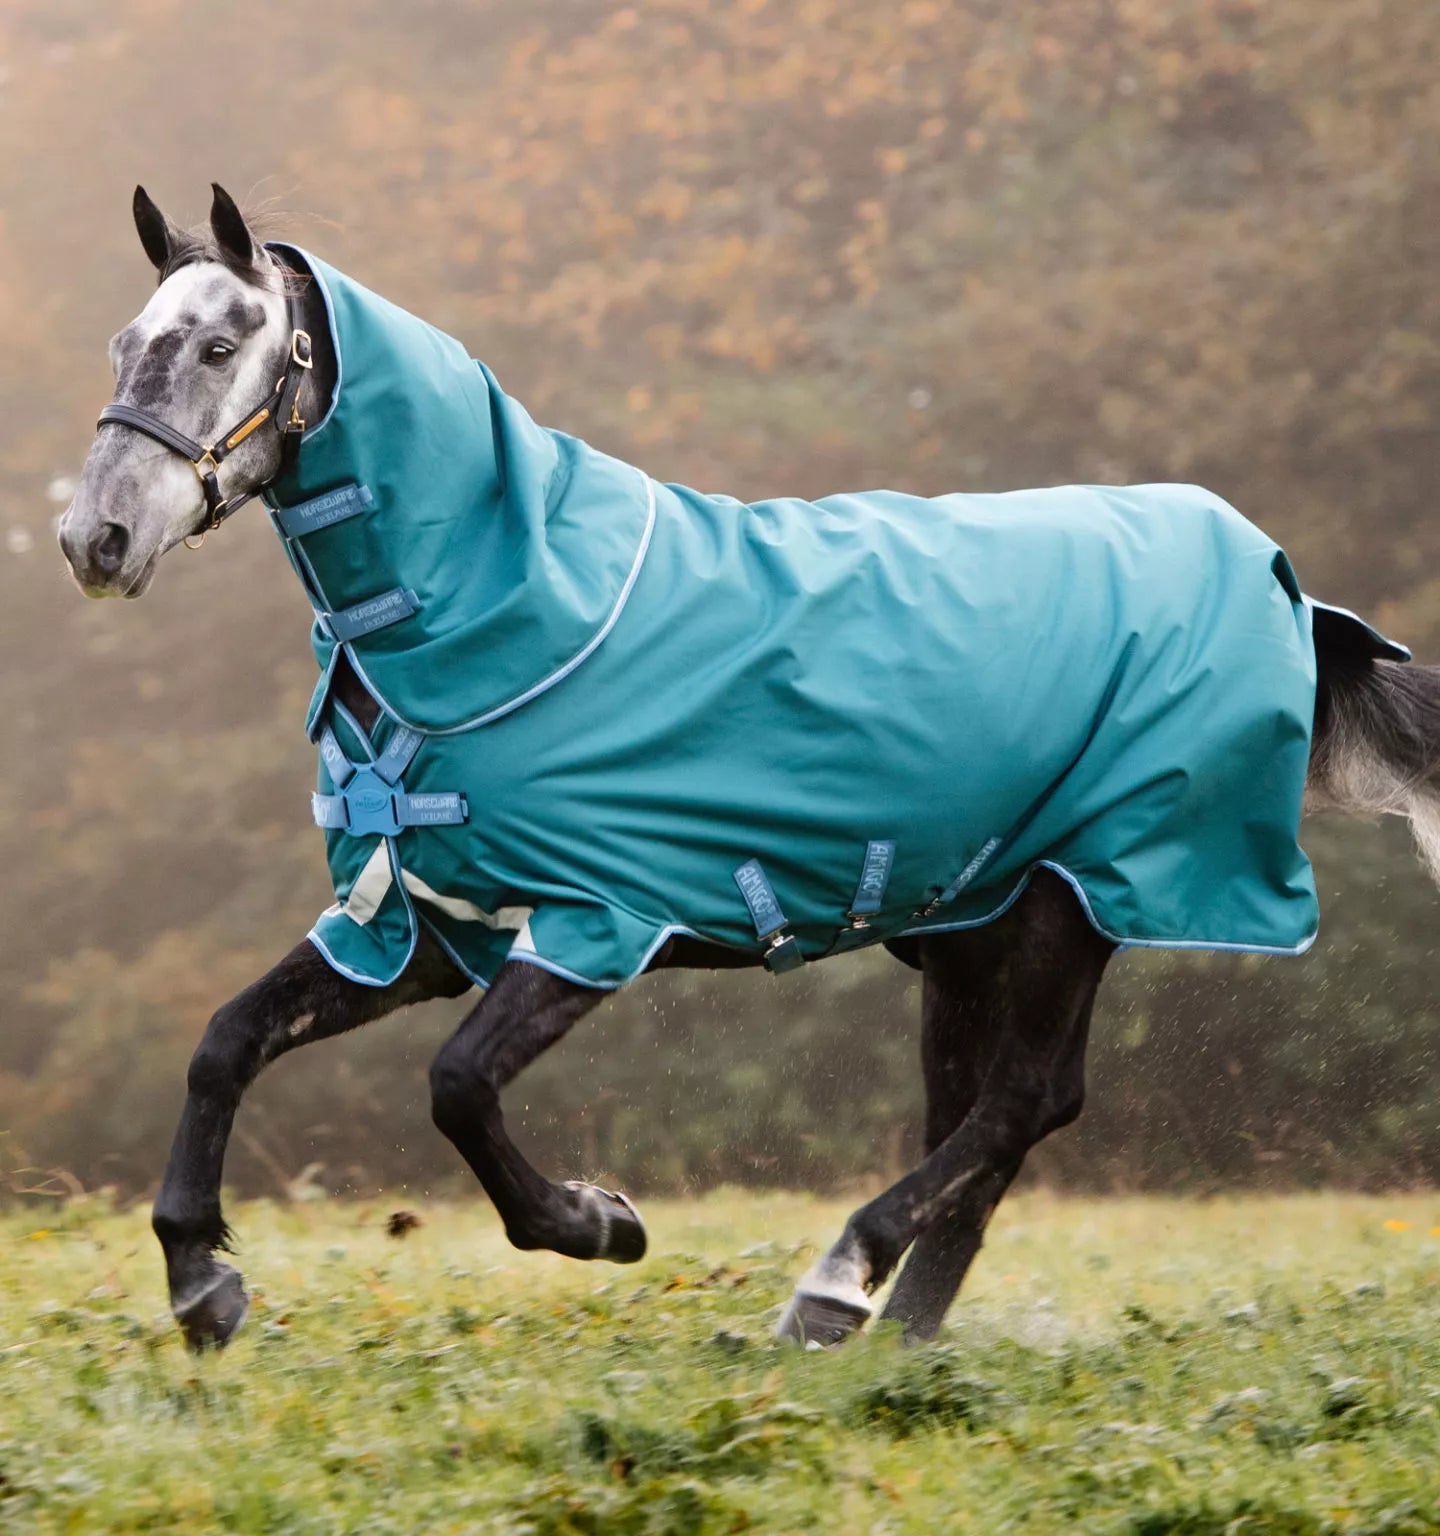 Close out of the LIME GREEN - Tipperary Horse Blankets